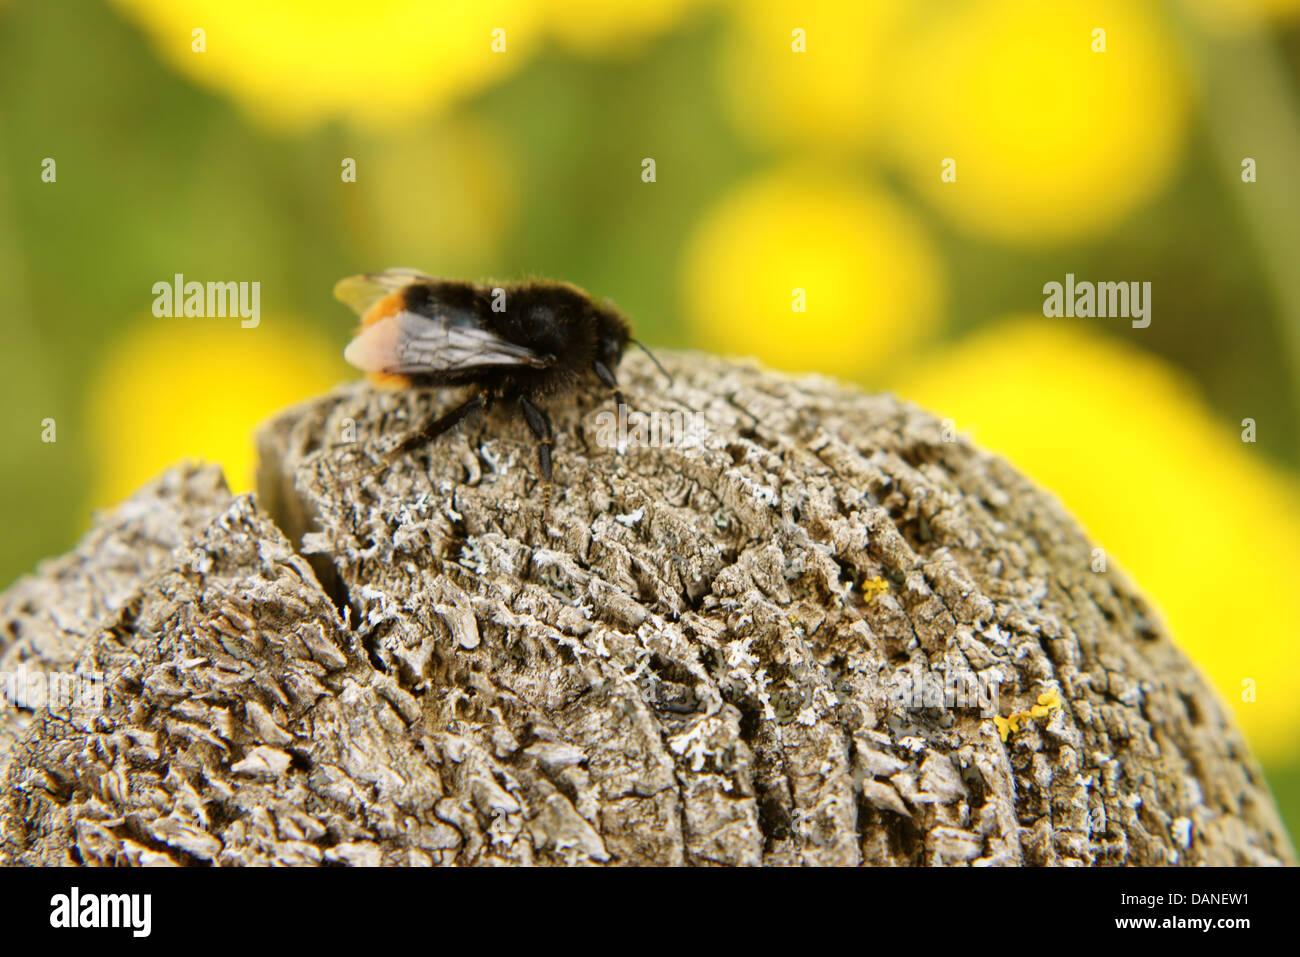 Bumblebee on a wooden pole Stock Photo